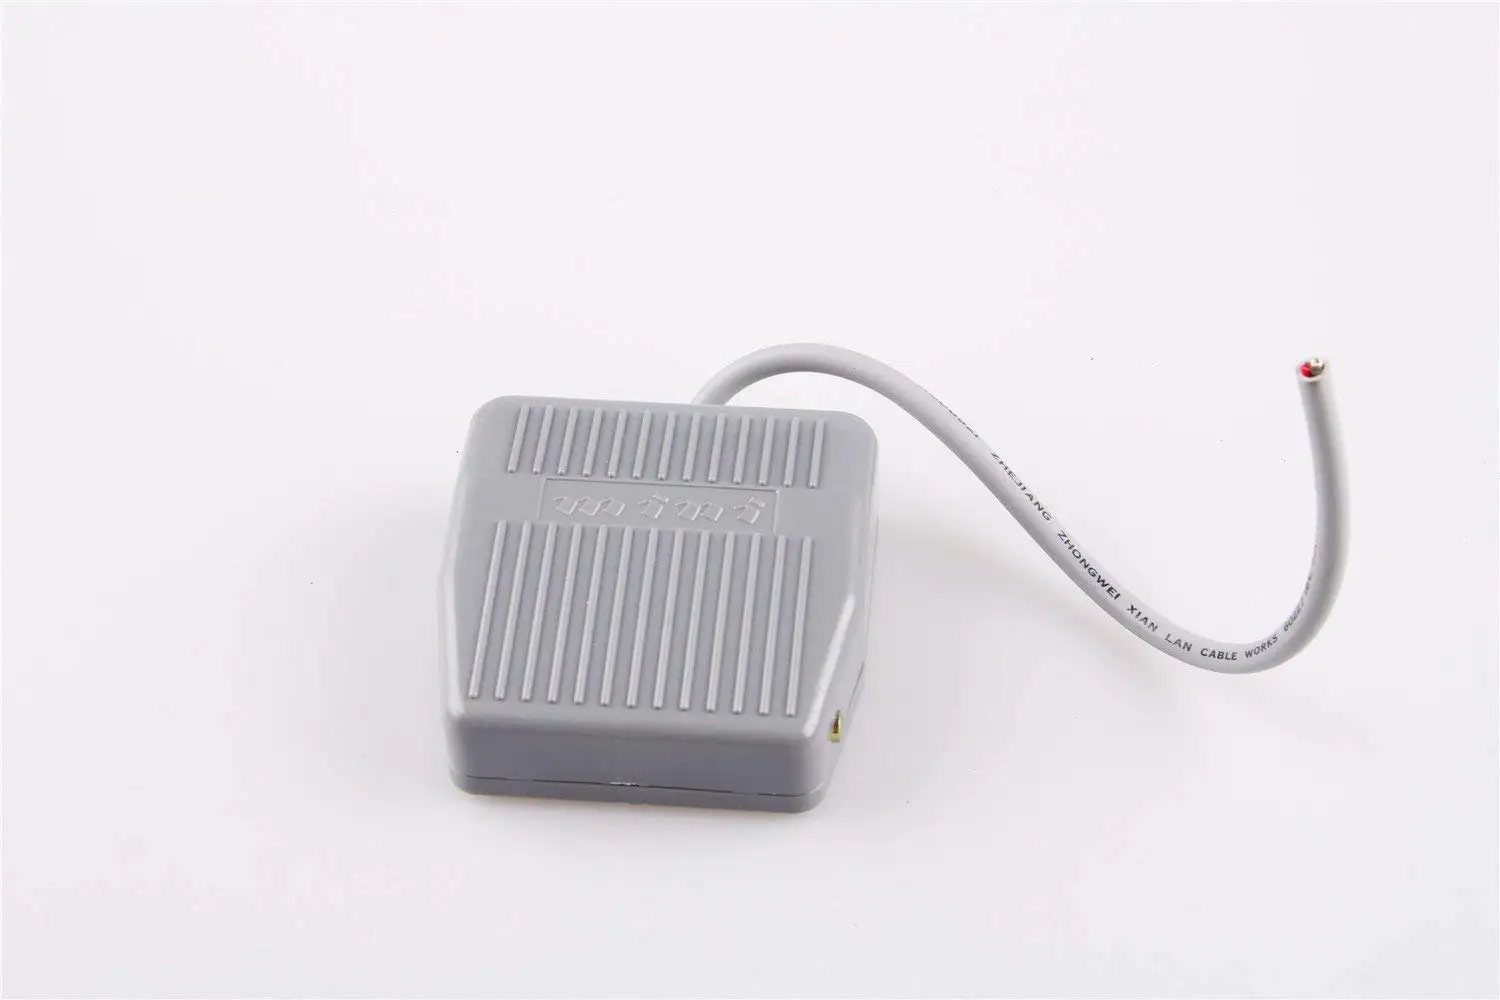 Baomain Foot Pedal Switch TFS-201 Hands Free Nonslip On Off Momentary AC 250V 10A Gray